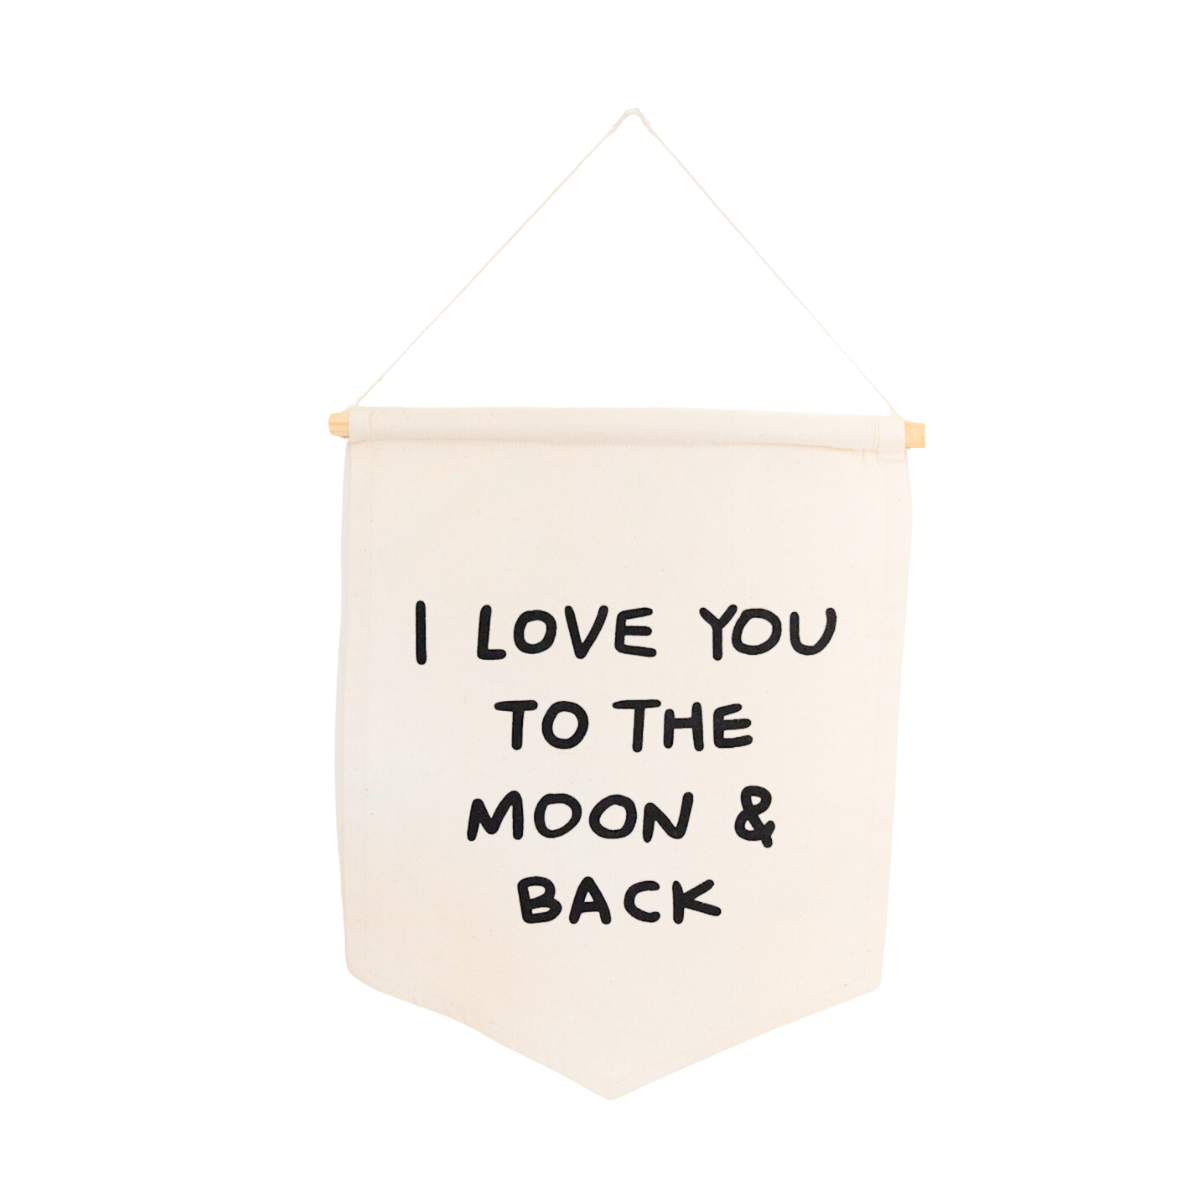 "I Love You to the Moon and Back" Wall Hanging